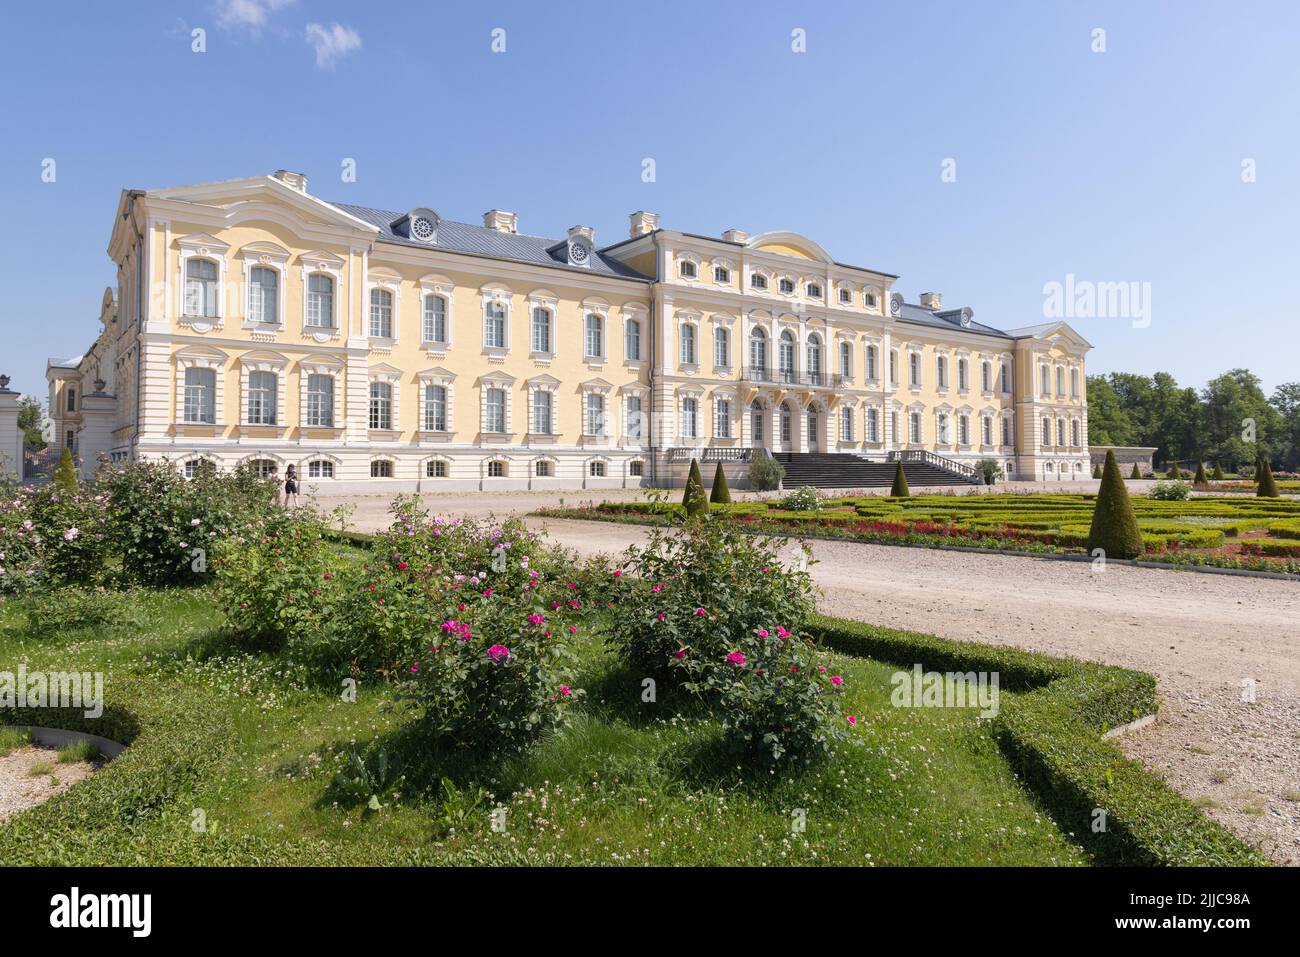 Baroque architecture; Rundale Palace, Latvia; Exterior,18th century Baroque palace, now a museum and garden,  Latvia, Europe Stock Photo